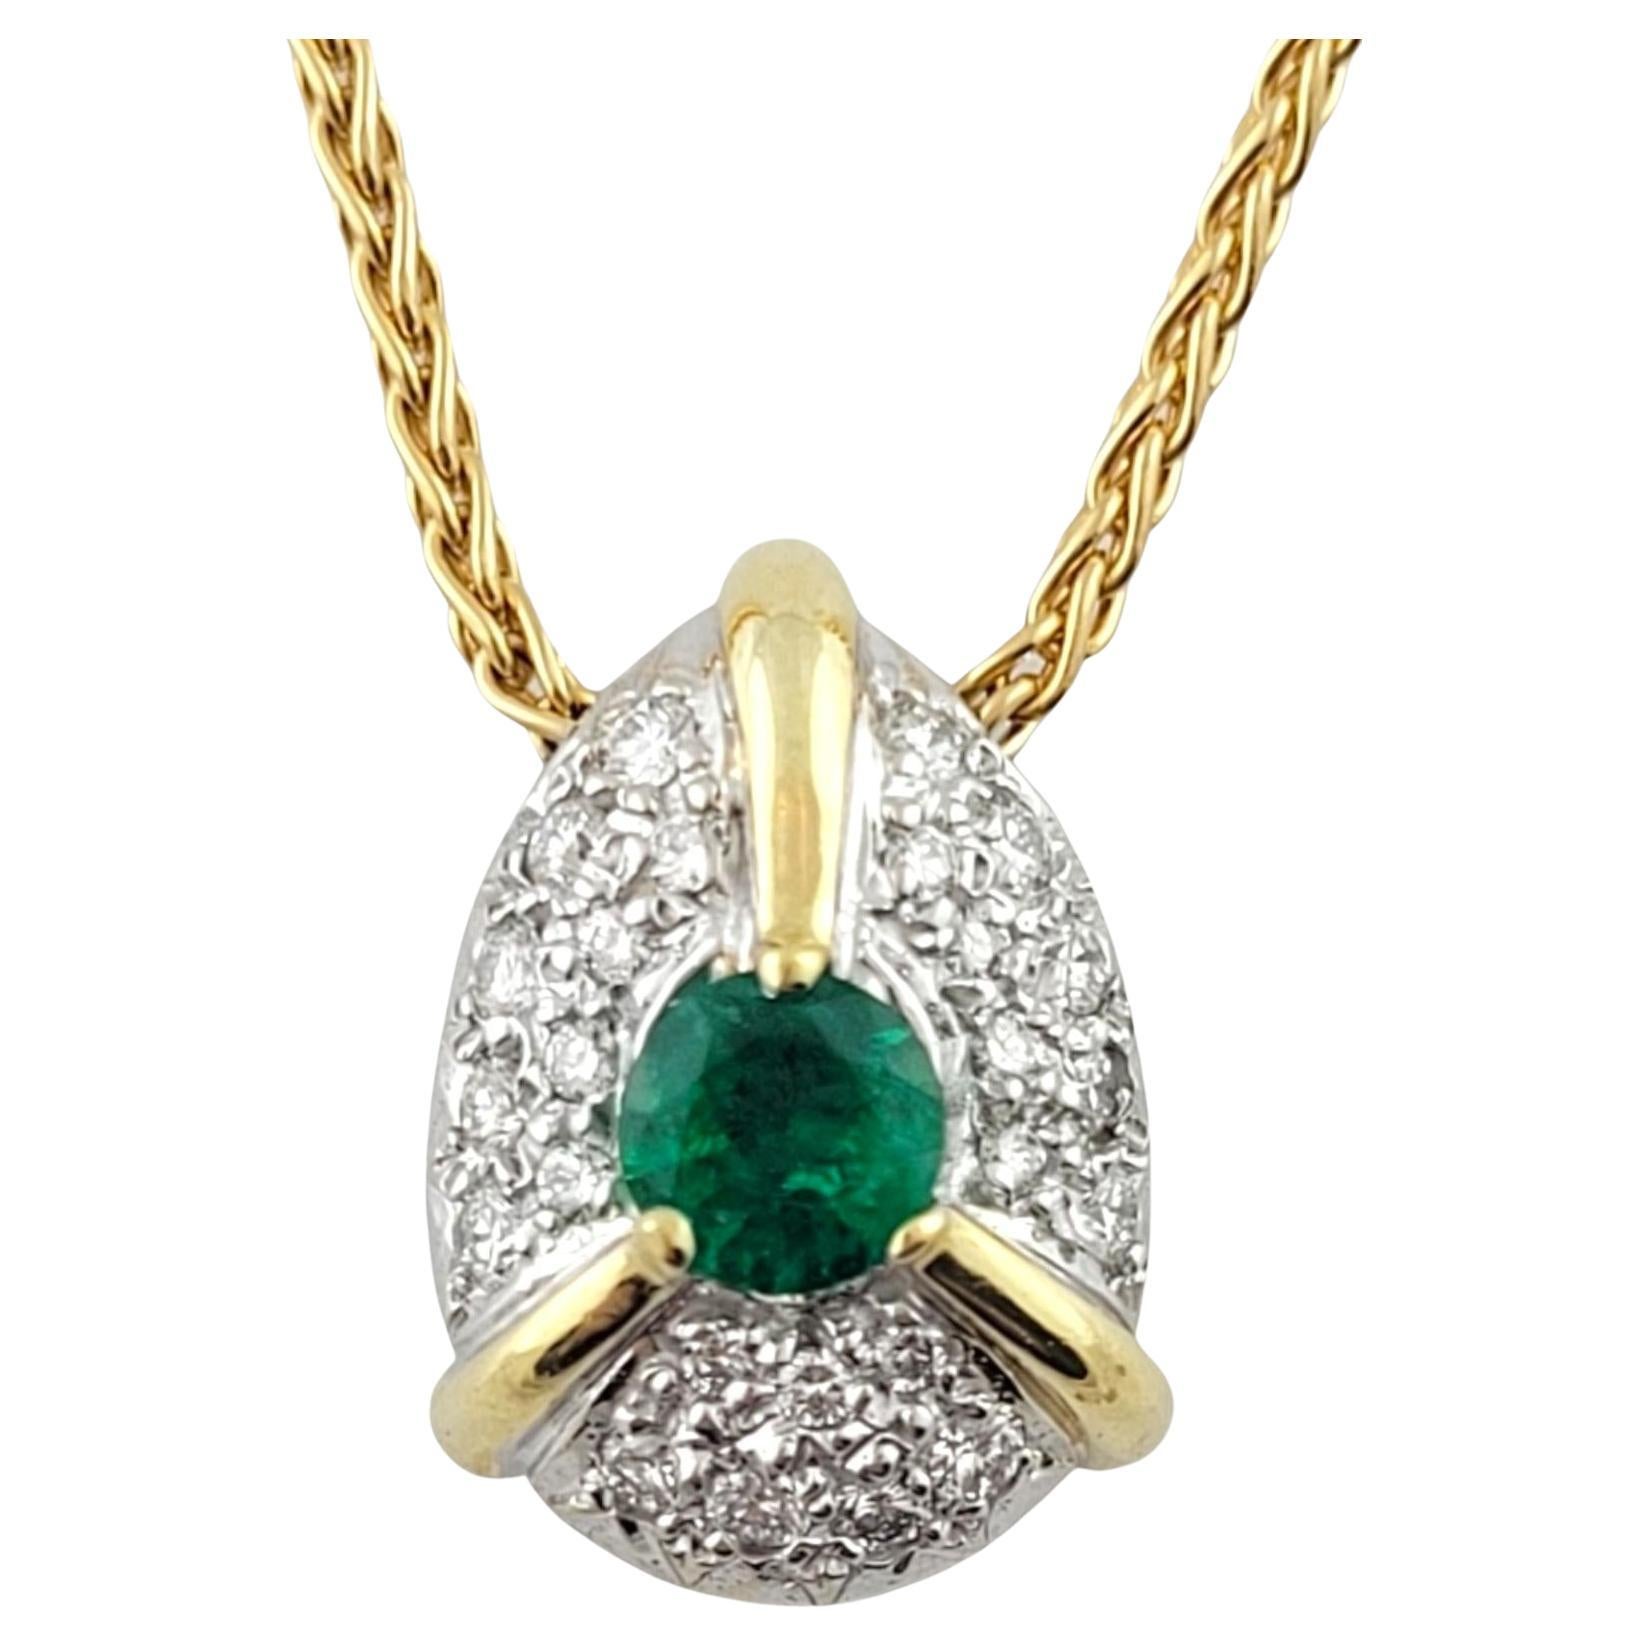 18K Yellow & White Gold Pave Diamond & Emerald Pendant Necklace #16246 For Sale